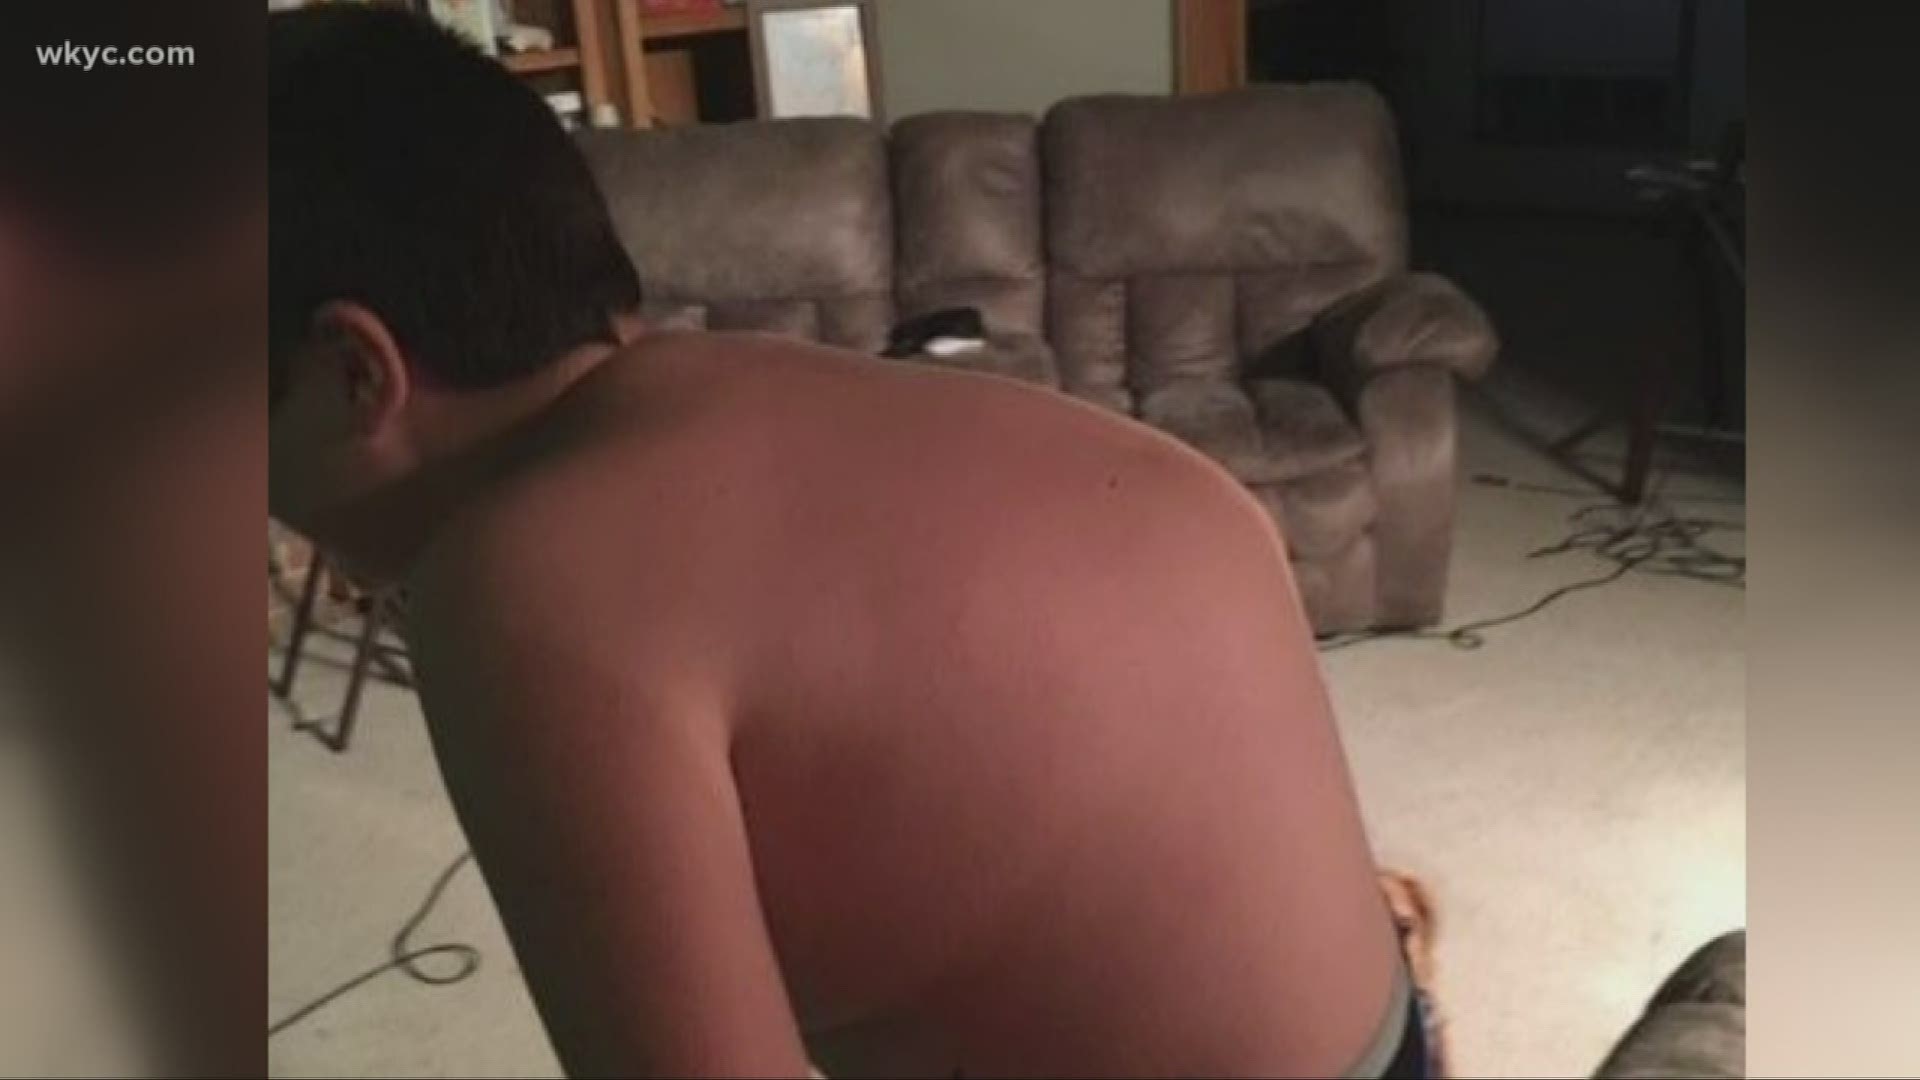 Logan Elliott, 16, suffers from a spinal condition called kyphosis. Two years ago, puberty caused his back to curve at a sharp angle.